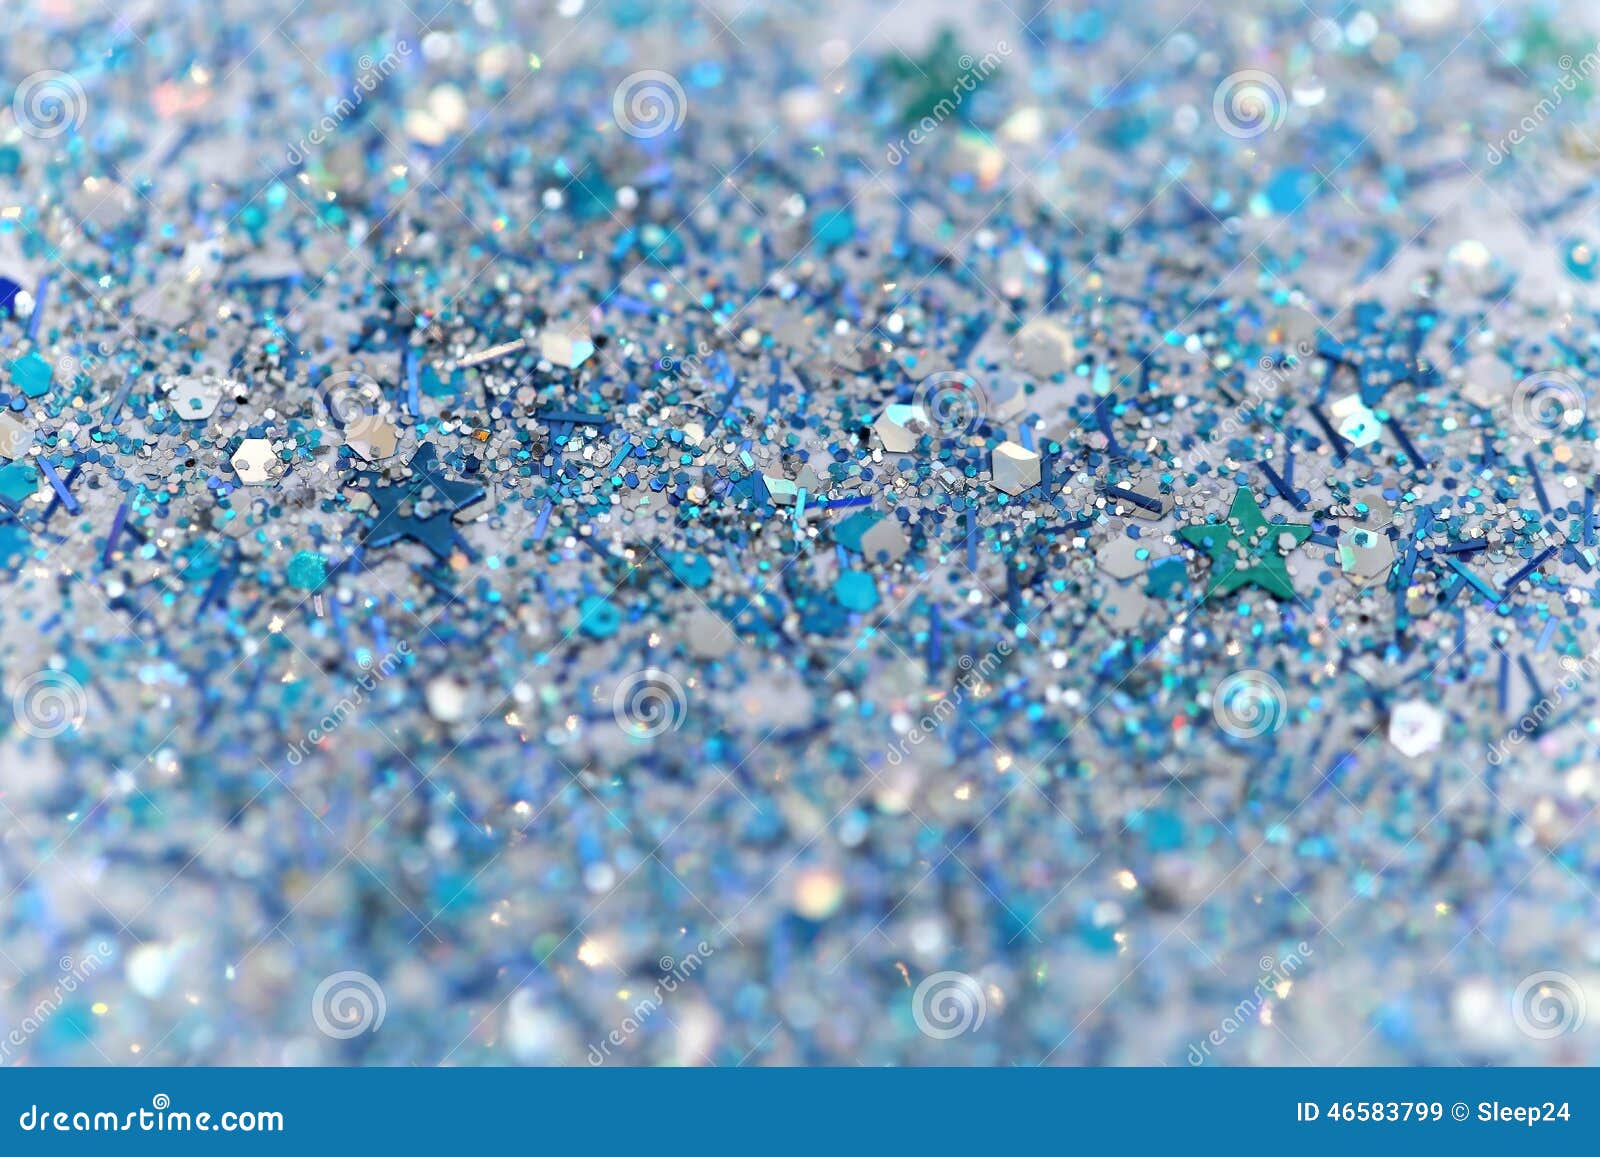 Blue and Silver Frozen Snow Winter Sparkling Stars Glitter Background.  Holiday, Christmas, New Year Abstract Texture Stock Image - Image of  festive, christmas: 46583799